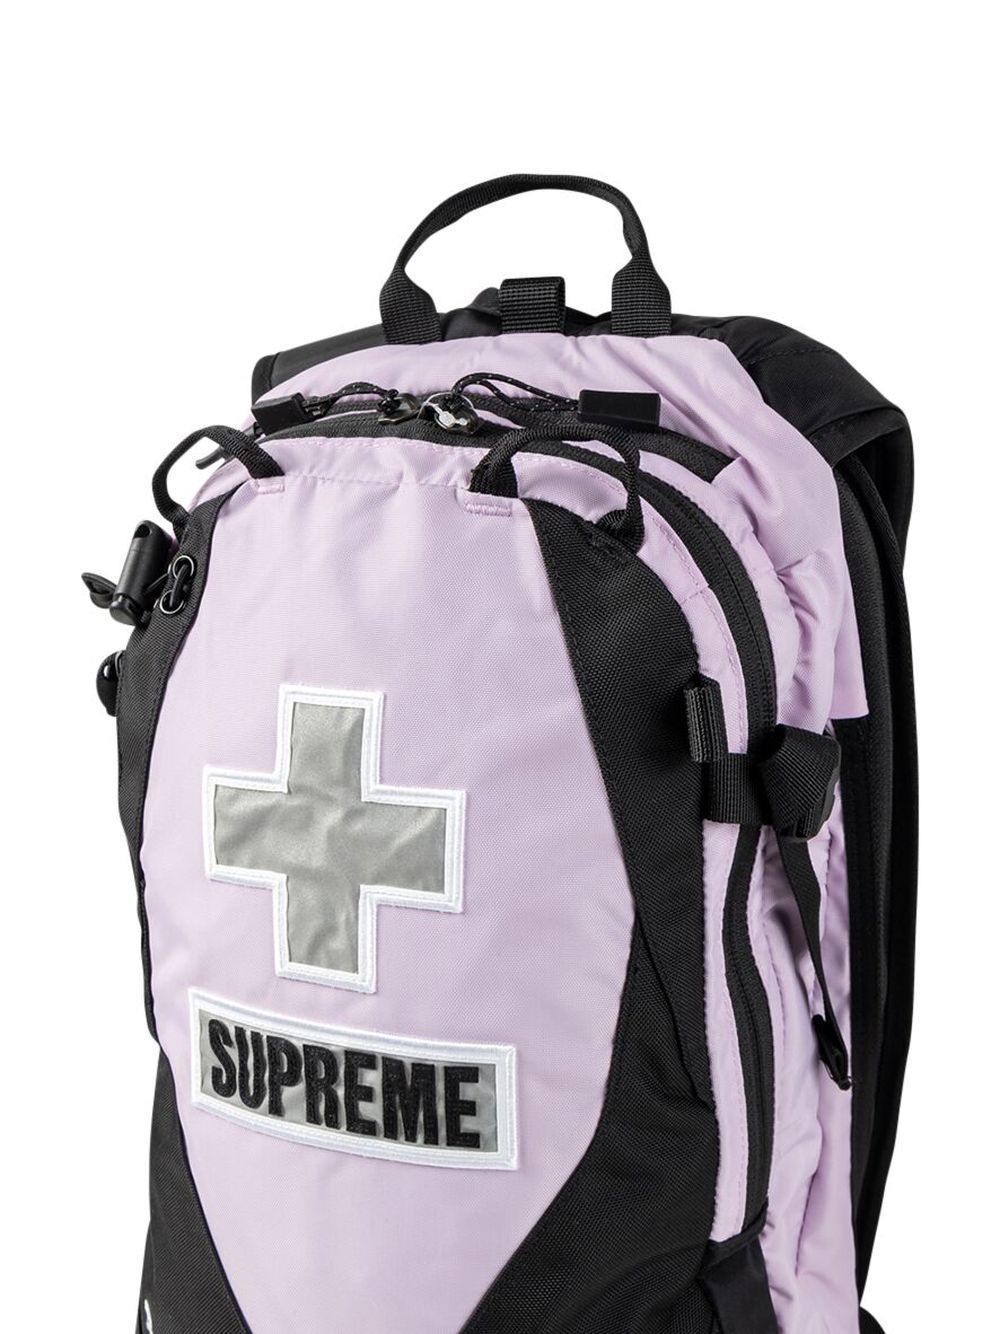 Supreme x The North Face Summit Series Rescue Chugach 16 Backpack - Farfetch